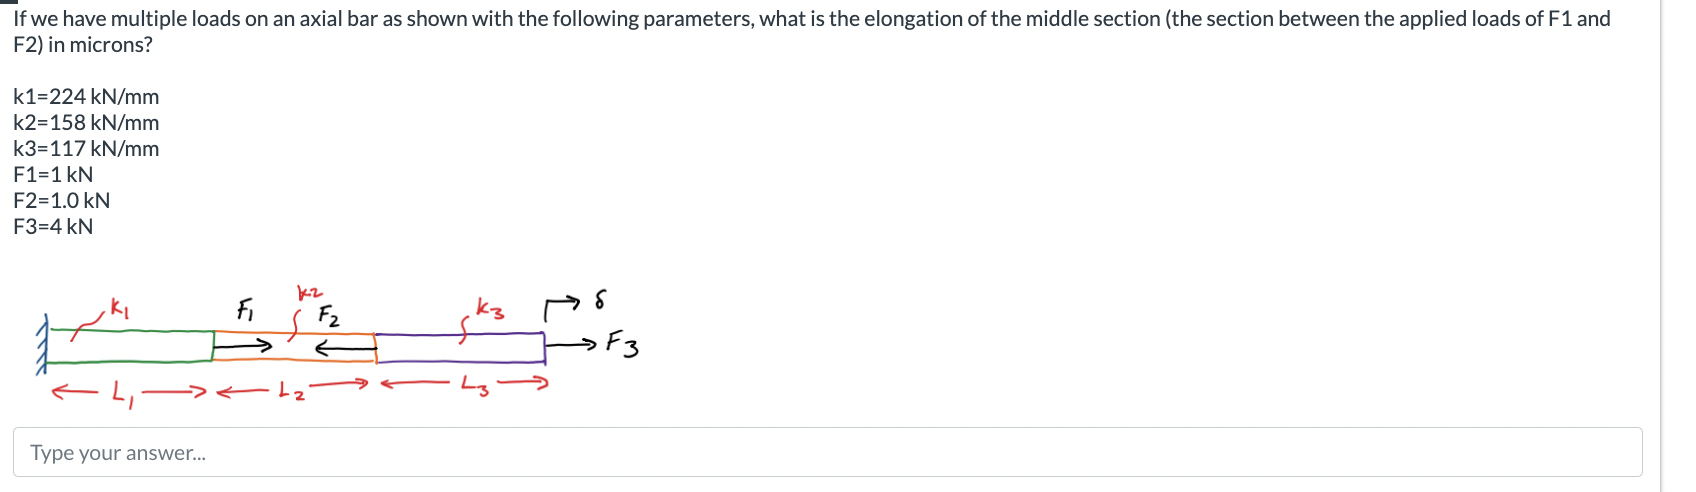 If we have multiple loads on an axial bar as shown with the following parameters, what is the elongation of